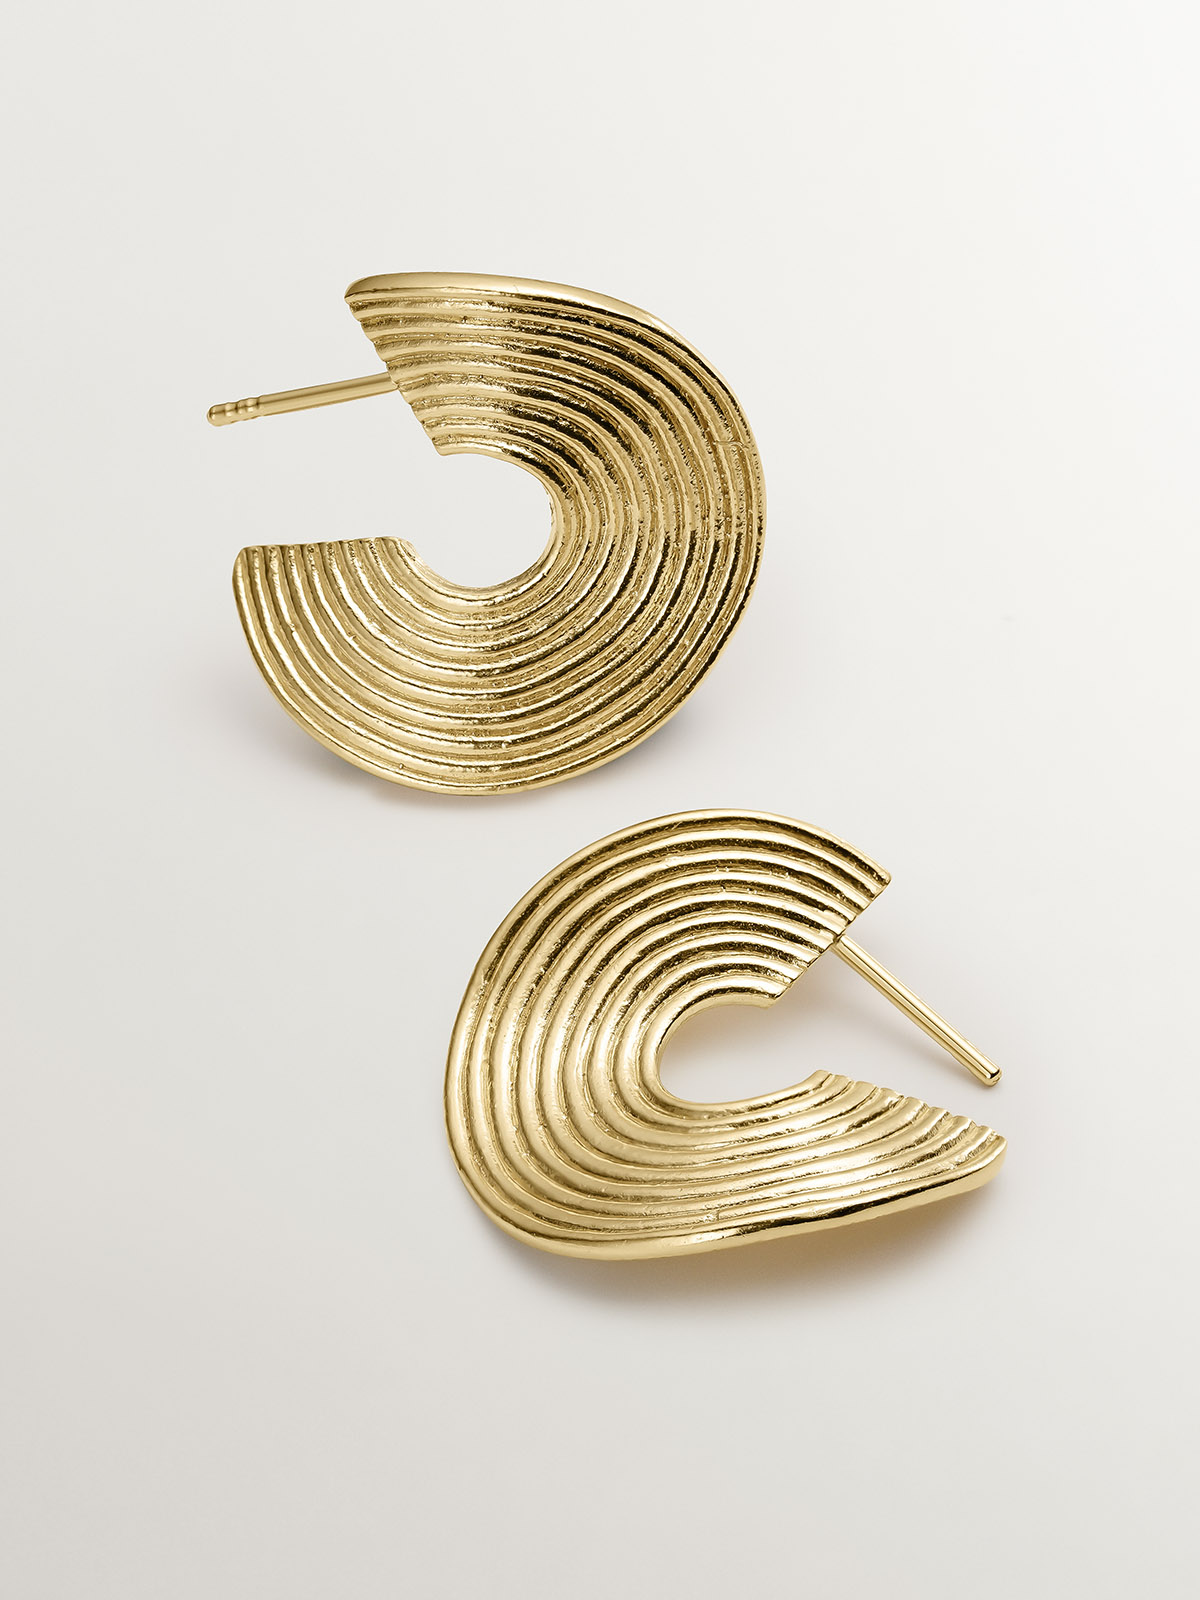 Medium sized hoop earrings made of 925 silver, bathed in 18K yellow gold with texture and irregular shape.